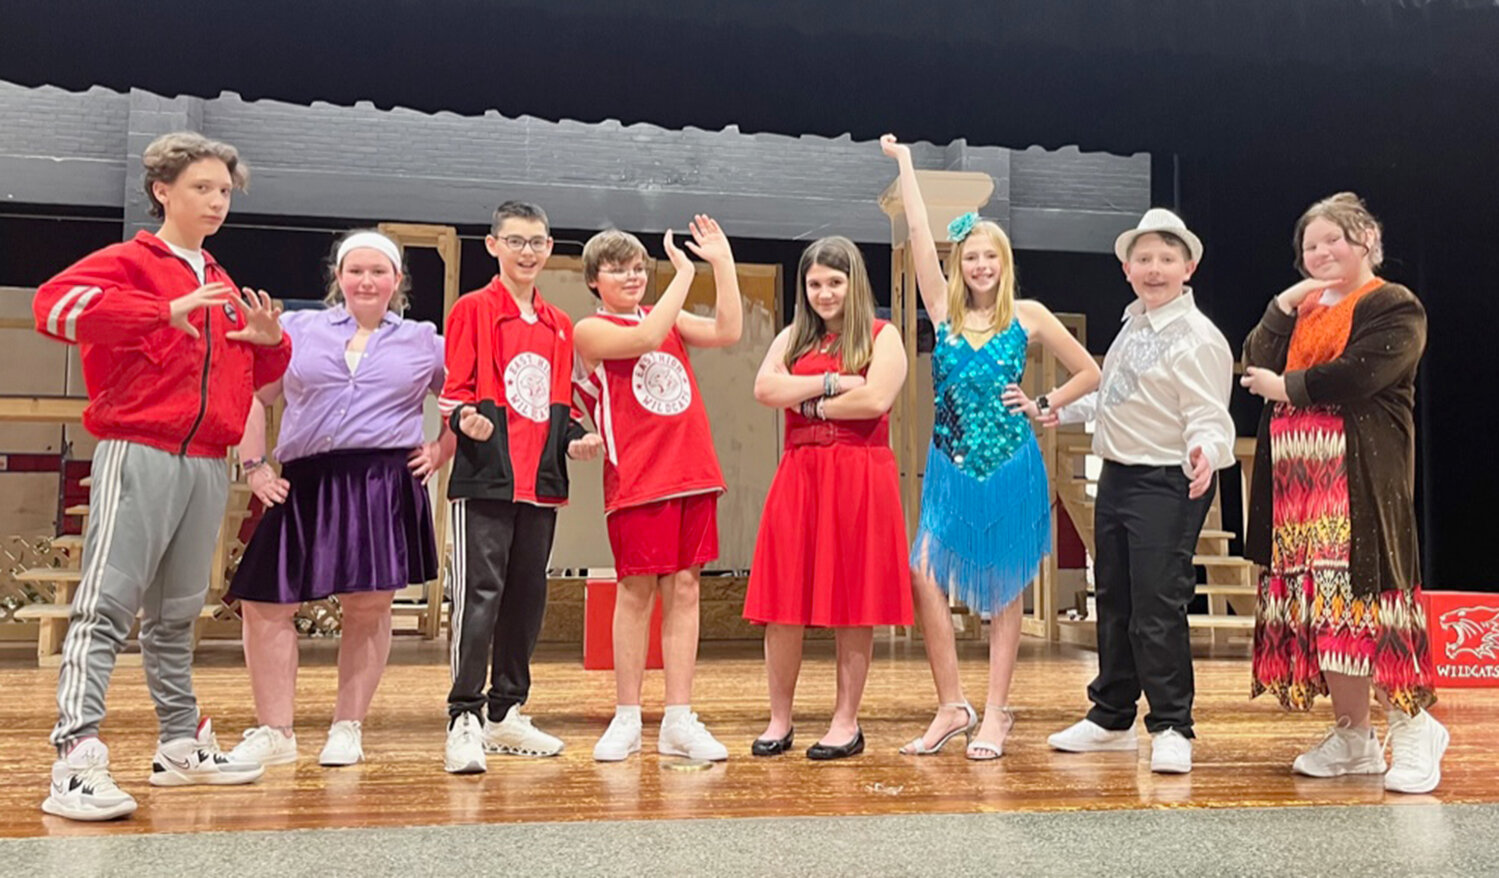 Denti Elementary School students, including, from left, Emmett Newton as Coach Bolton, Lily Riolo as Taylor, Jacob Vanderhoof as Chad, Ryan Bush as Troy, Elayna Koor as Gabriella, Alexis Pape as Sharpay, Logan Edick as Ryan and Alora Woodlan as Ms. Darbus present Disney’s “High School Musical” at 6:30 p.m. March 23 and 24 in the Strough Junior High School auditorium in Rome.